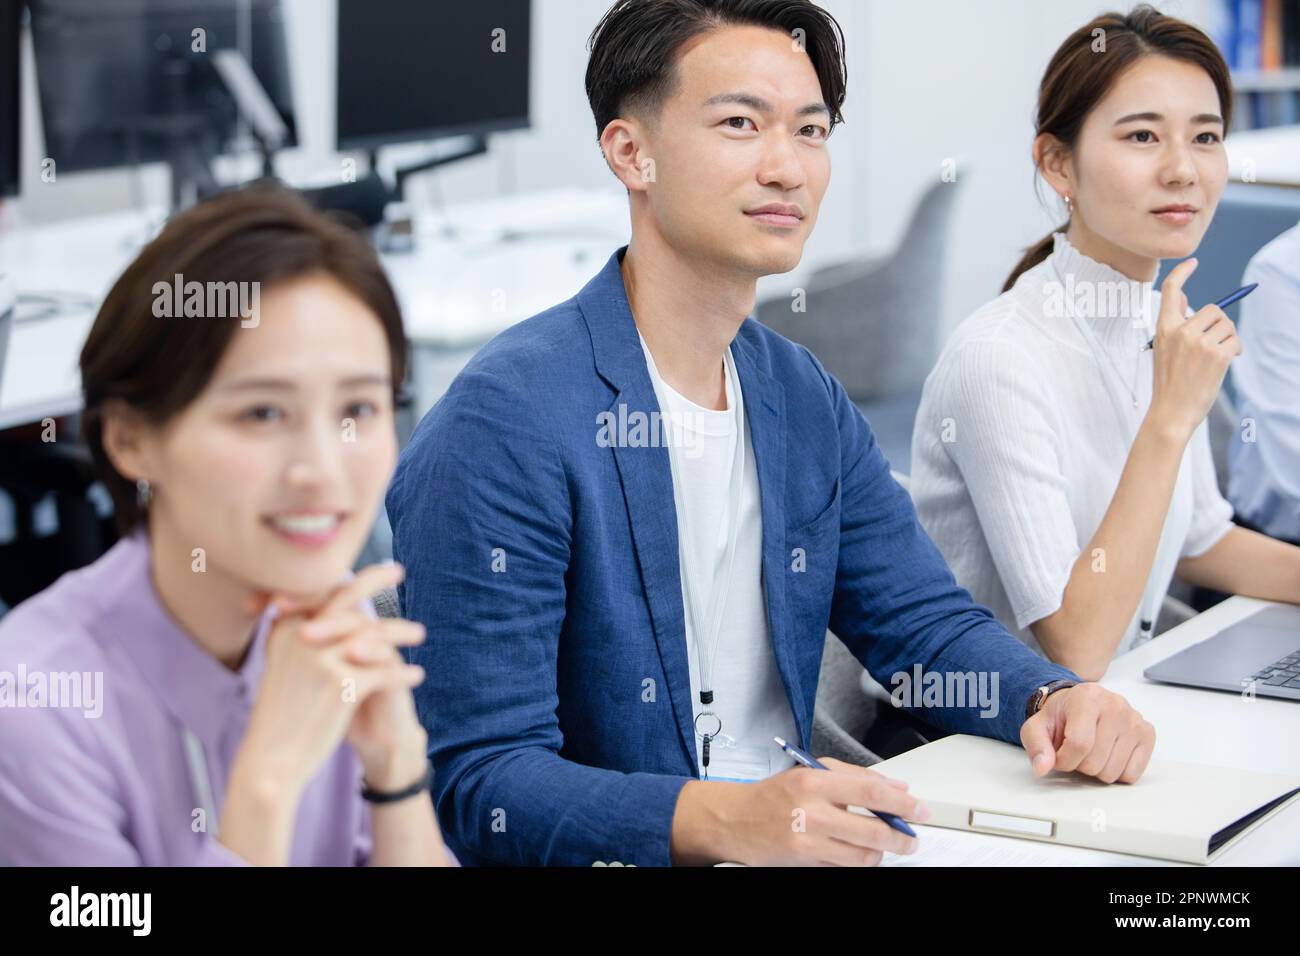 Businessmen and businesswomen standing side by side in a conference room Stock Photo